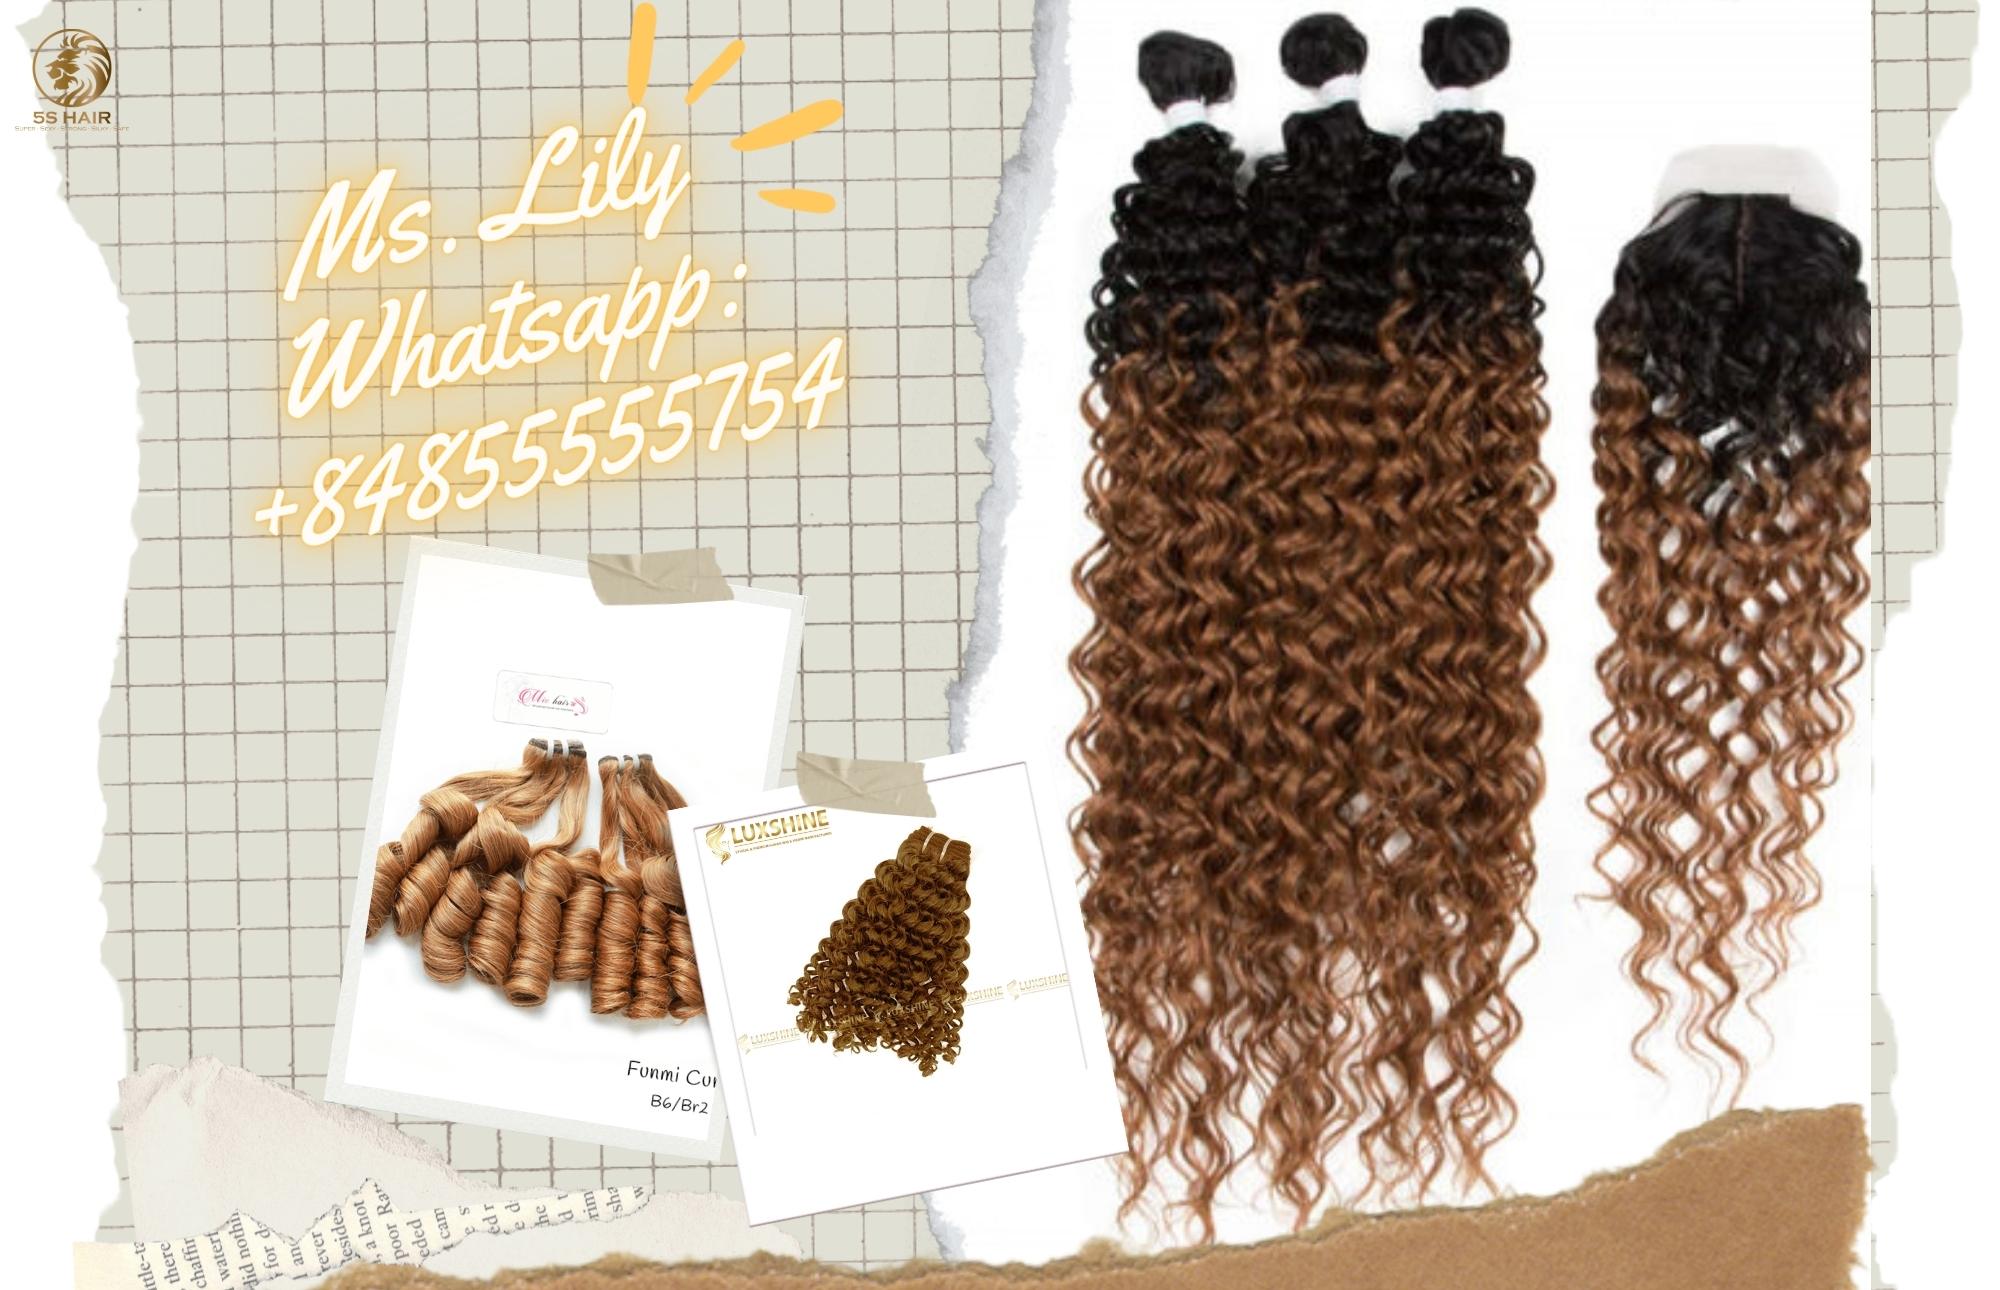 start-a-human-hair-extensions-wholesale-business-if-you-want-to-get-wealthy-4